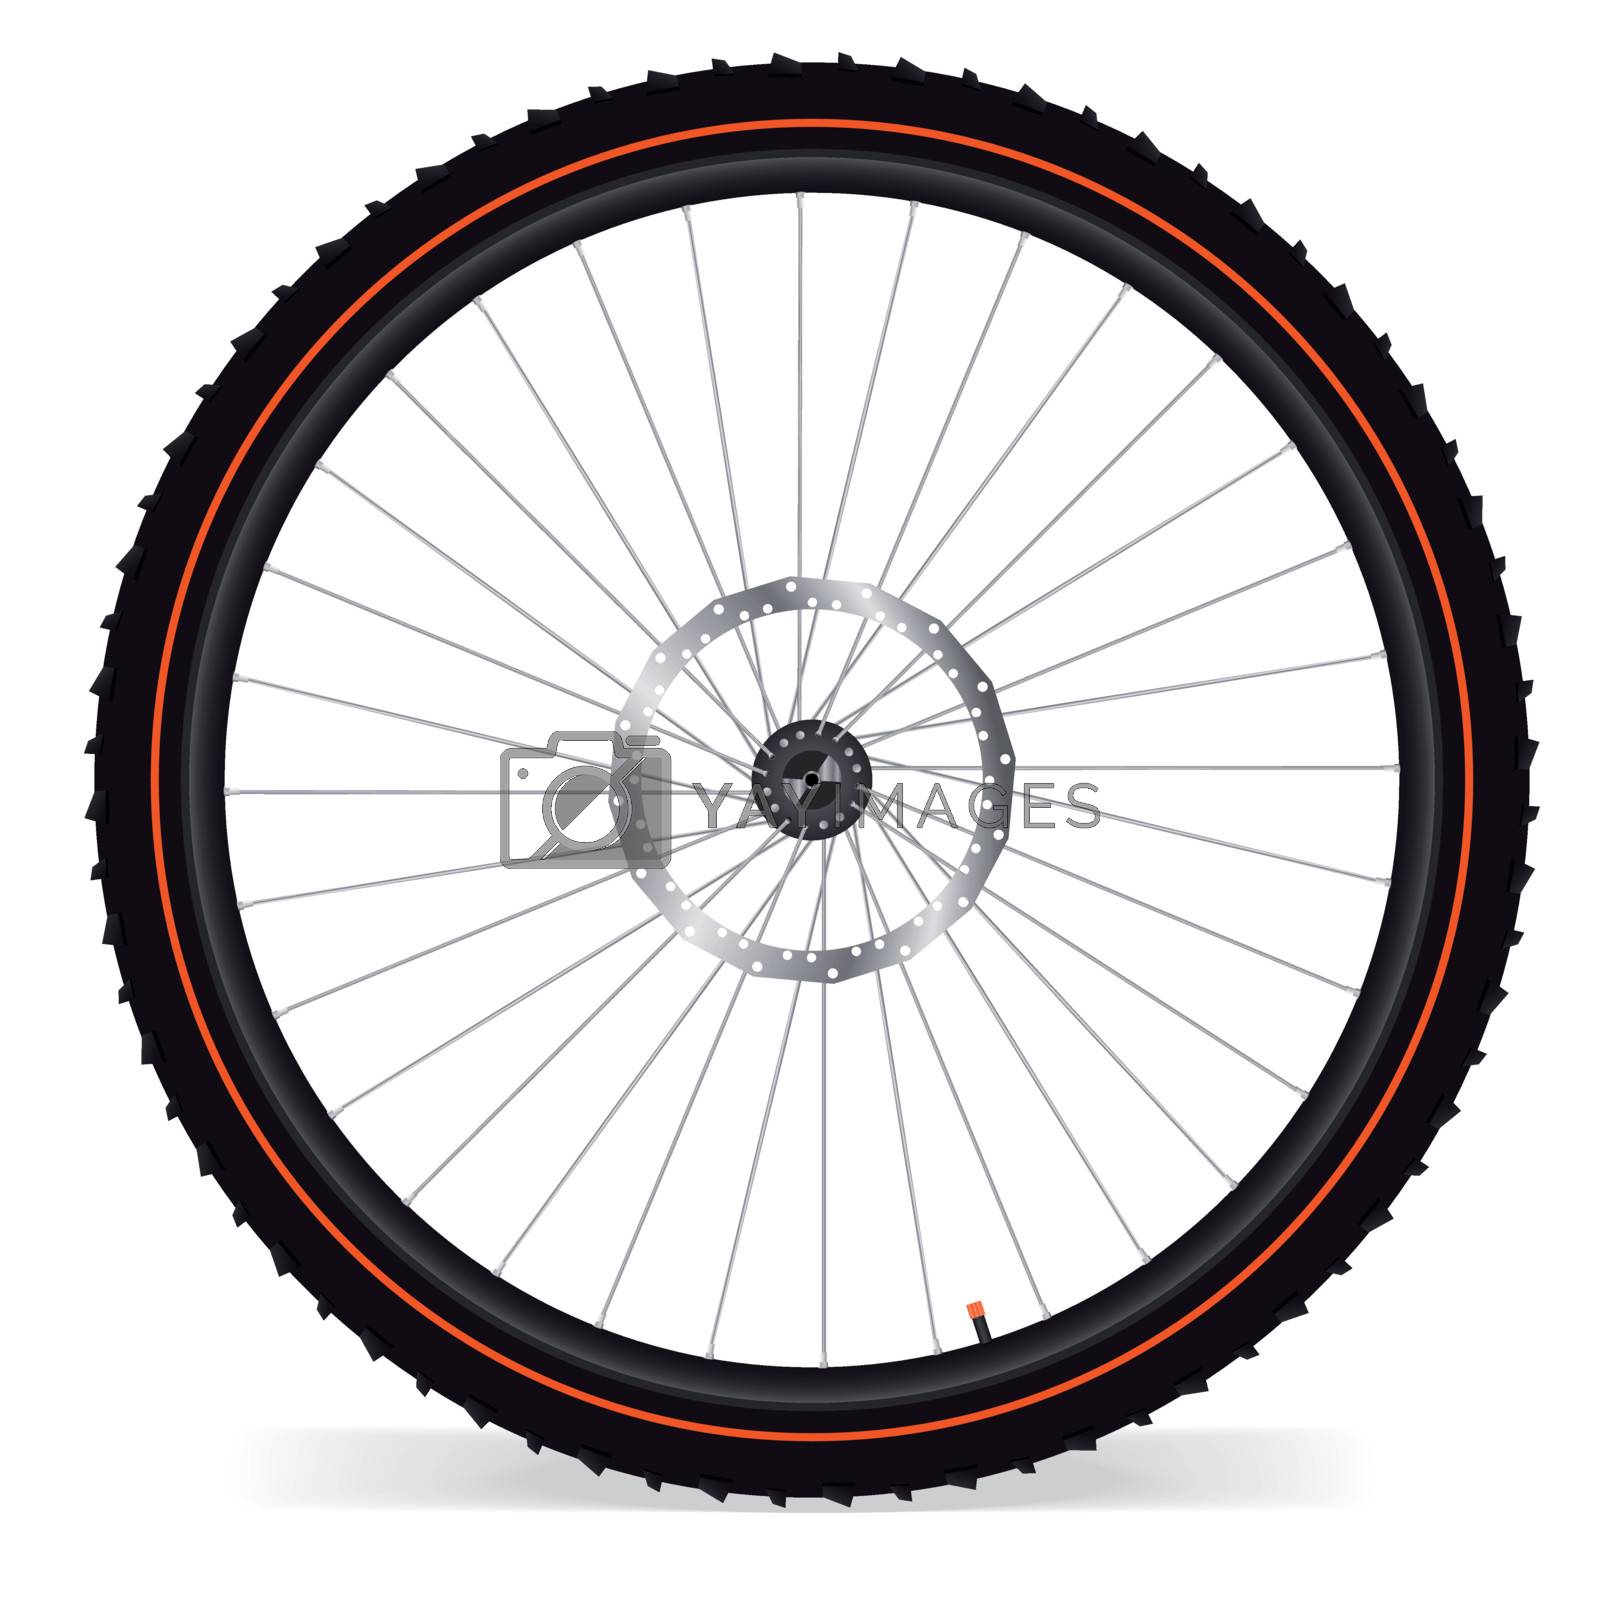 Royalty free image of Bike wheel by Diversphoto